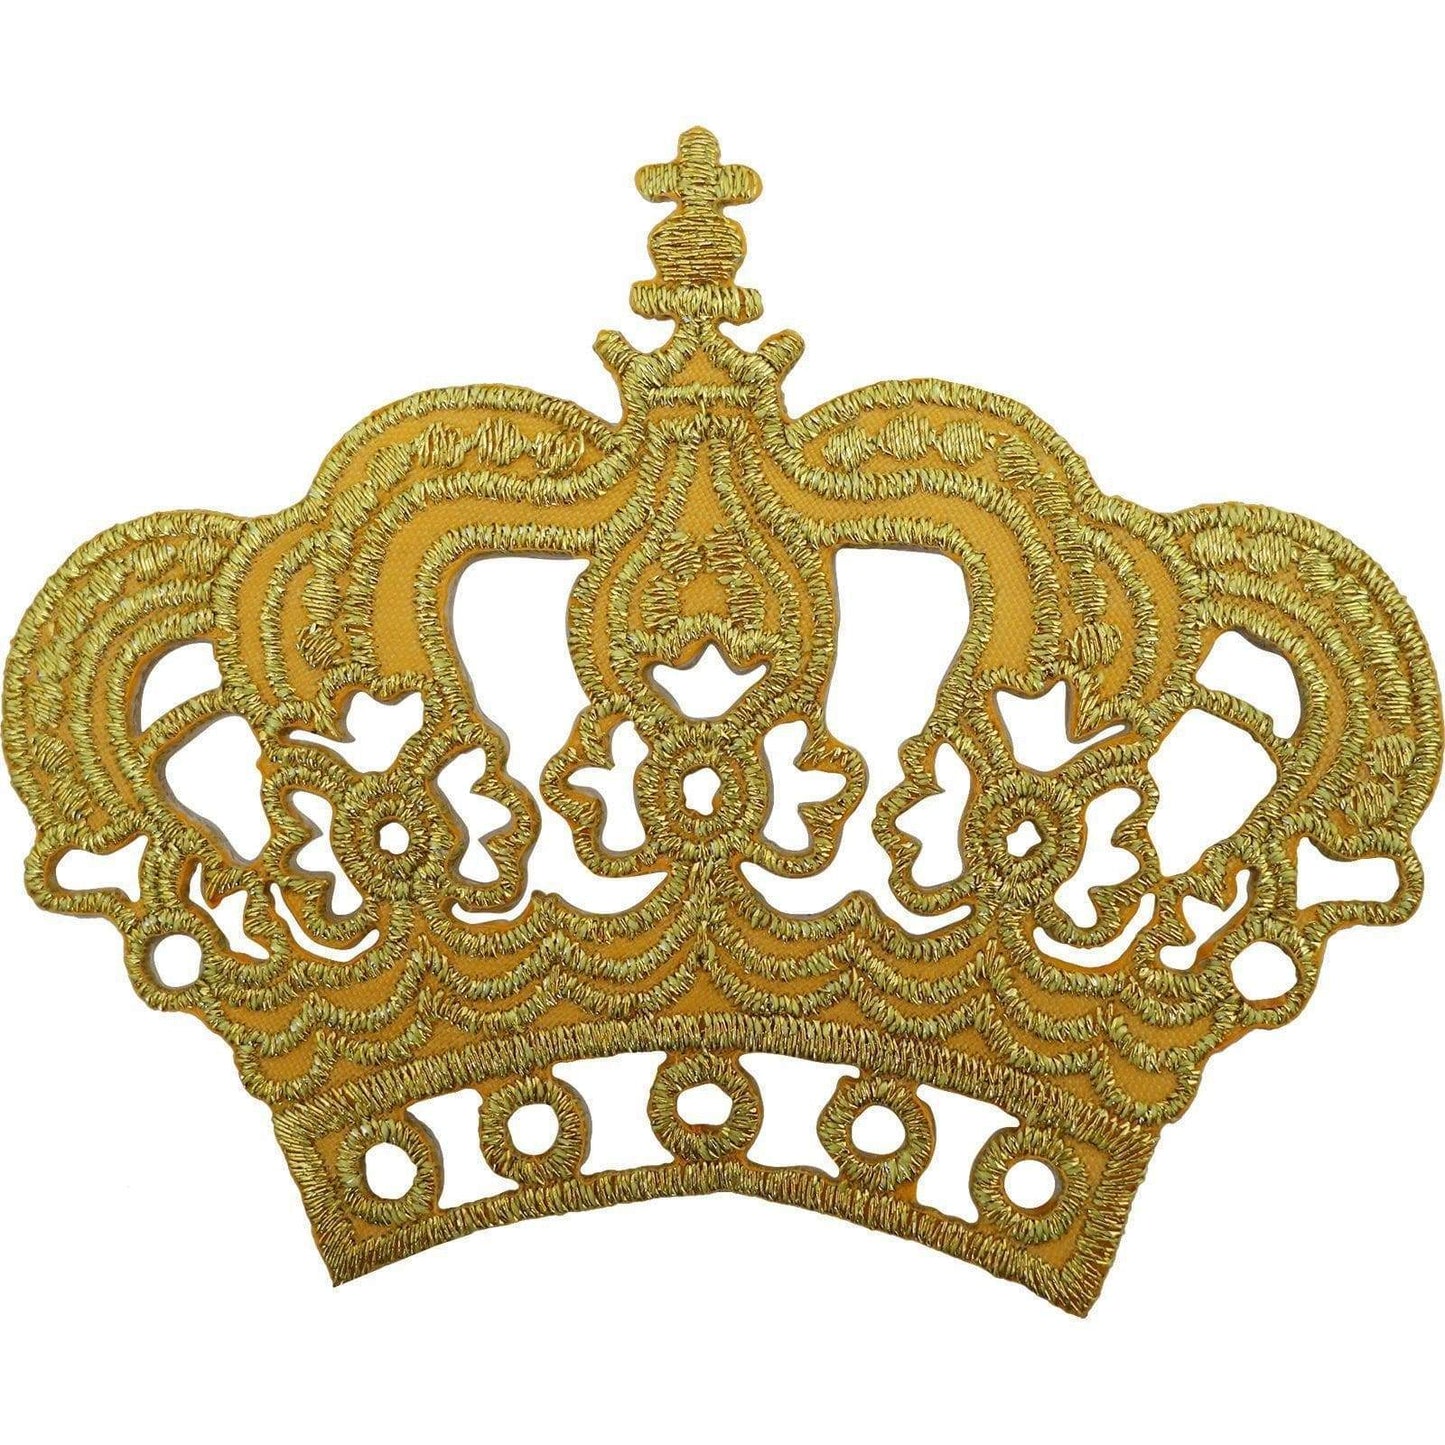 Gold Crown Patch Embroidered Iron / Sew On King Queen Fancy Dress Costume Badge